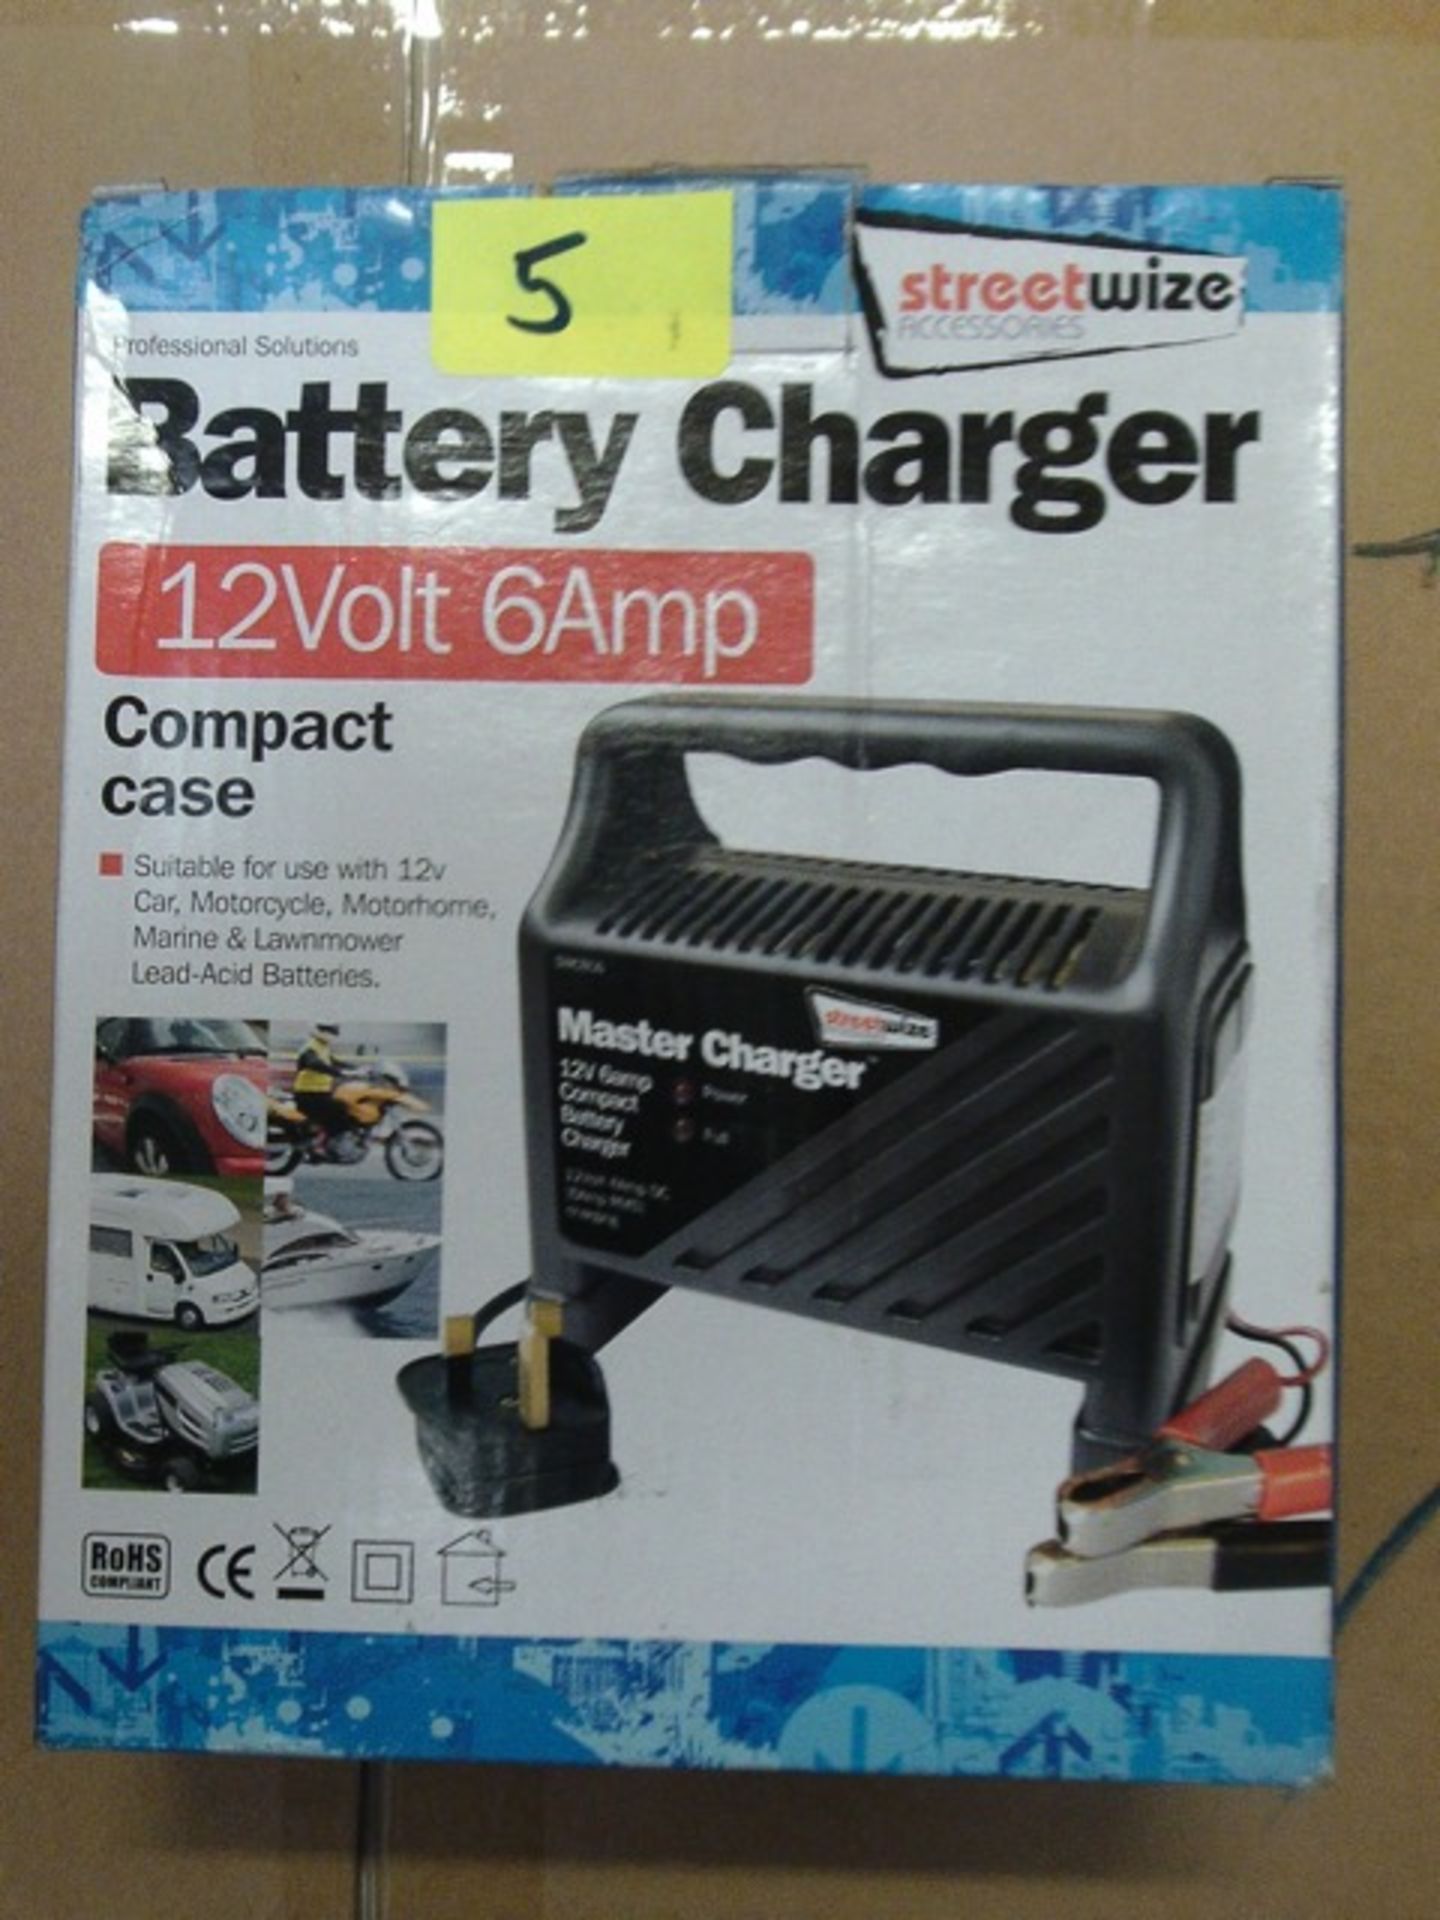 Streetwise 12Volt / 6 amp Battery Charger compact case rrp £26.99